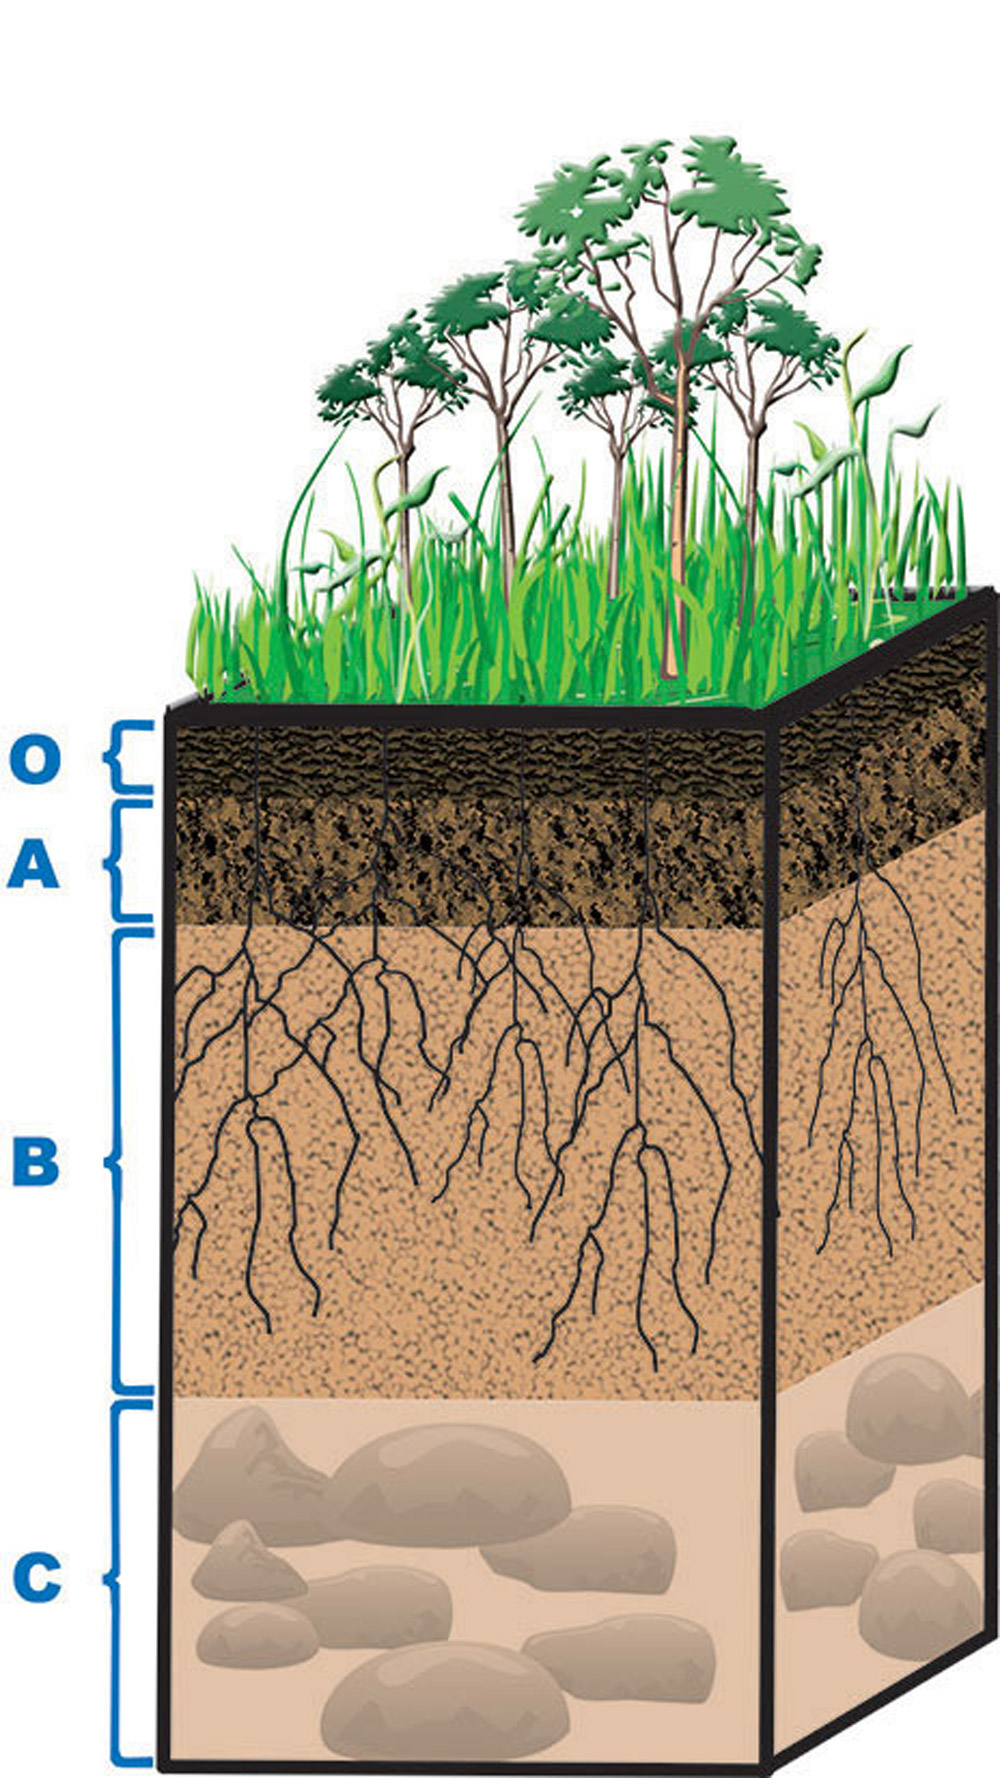 Image 8 Soil Layers All Soils Have Certain Layers The O Horizon Is The